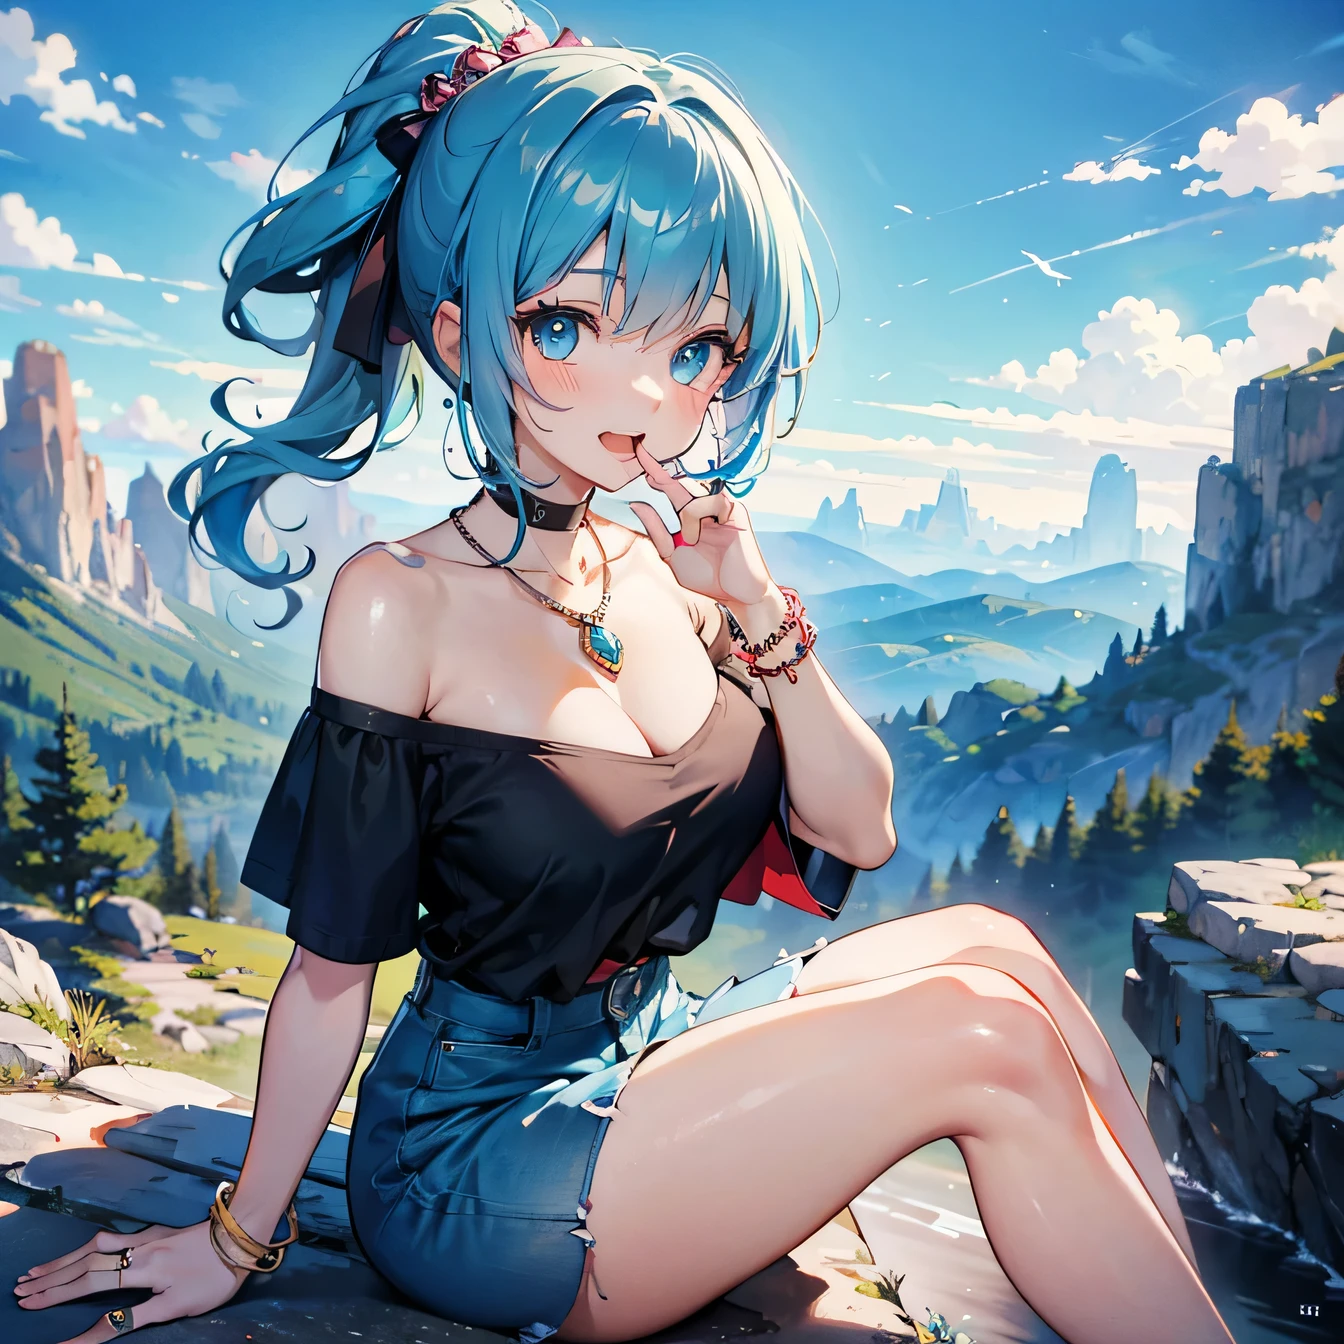 Anime Moe Art Style,highest quality,High resolution,Anatomically correct,One Girl,Mid-teens,A girl with light blue hair in a ponytail,Super detailed,Fantasy-style world,Off-the-shoulder tops,mini skirt,Big Breasts,A rich expression,Laughing with your mouth open,Mountainous Regions,Sitting leaning against a big rock,Eyes drawn in detail,hair ornaments,necklace,bracelet,ring,8K